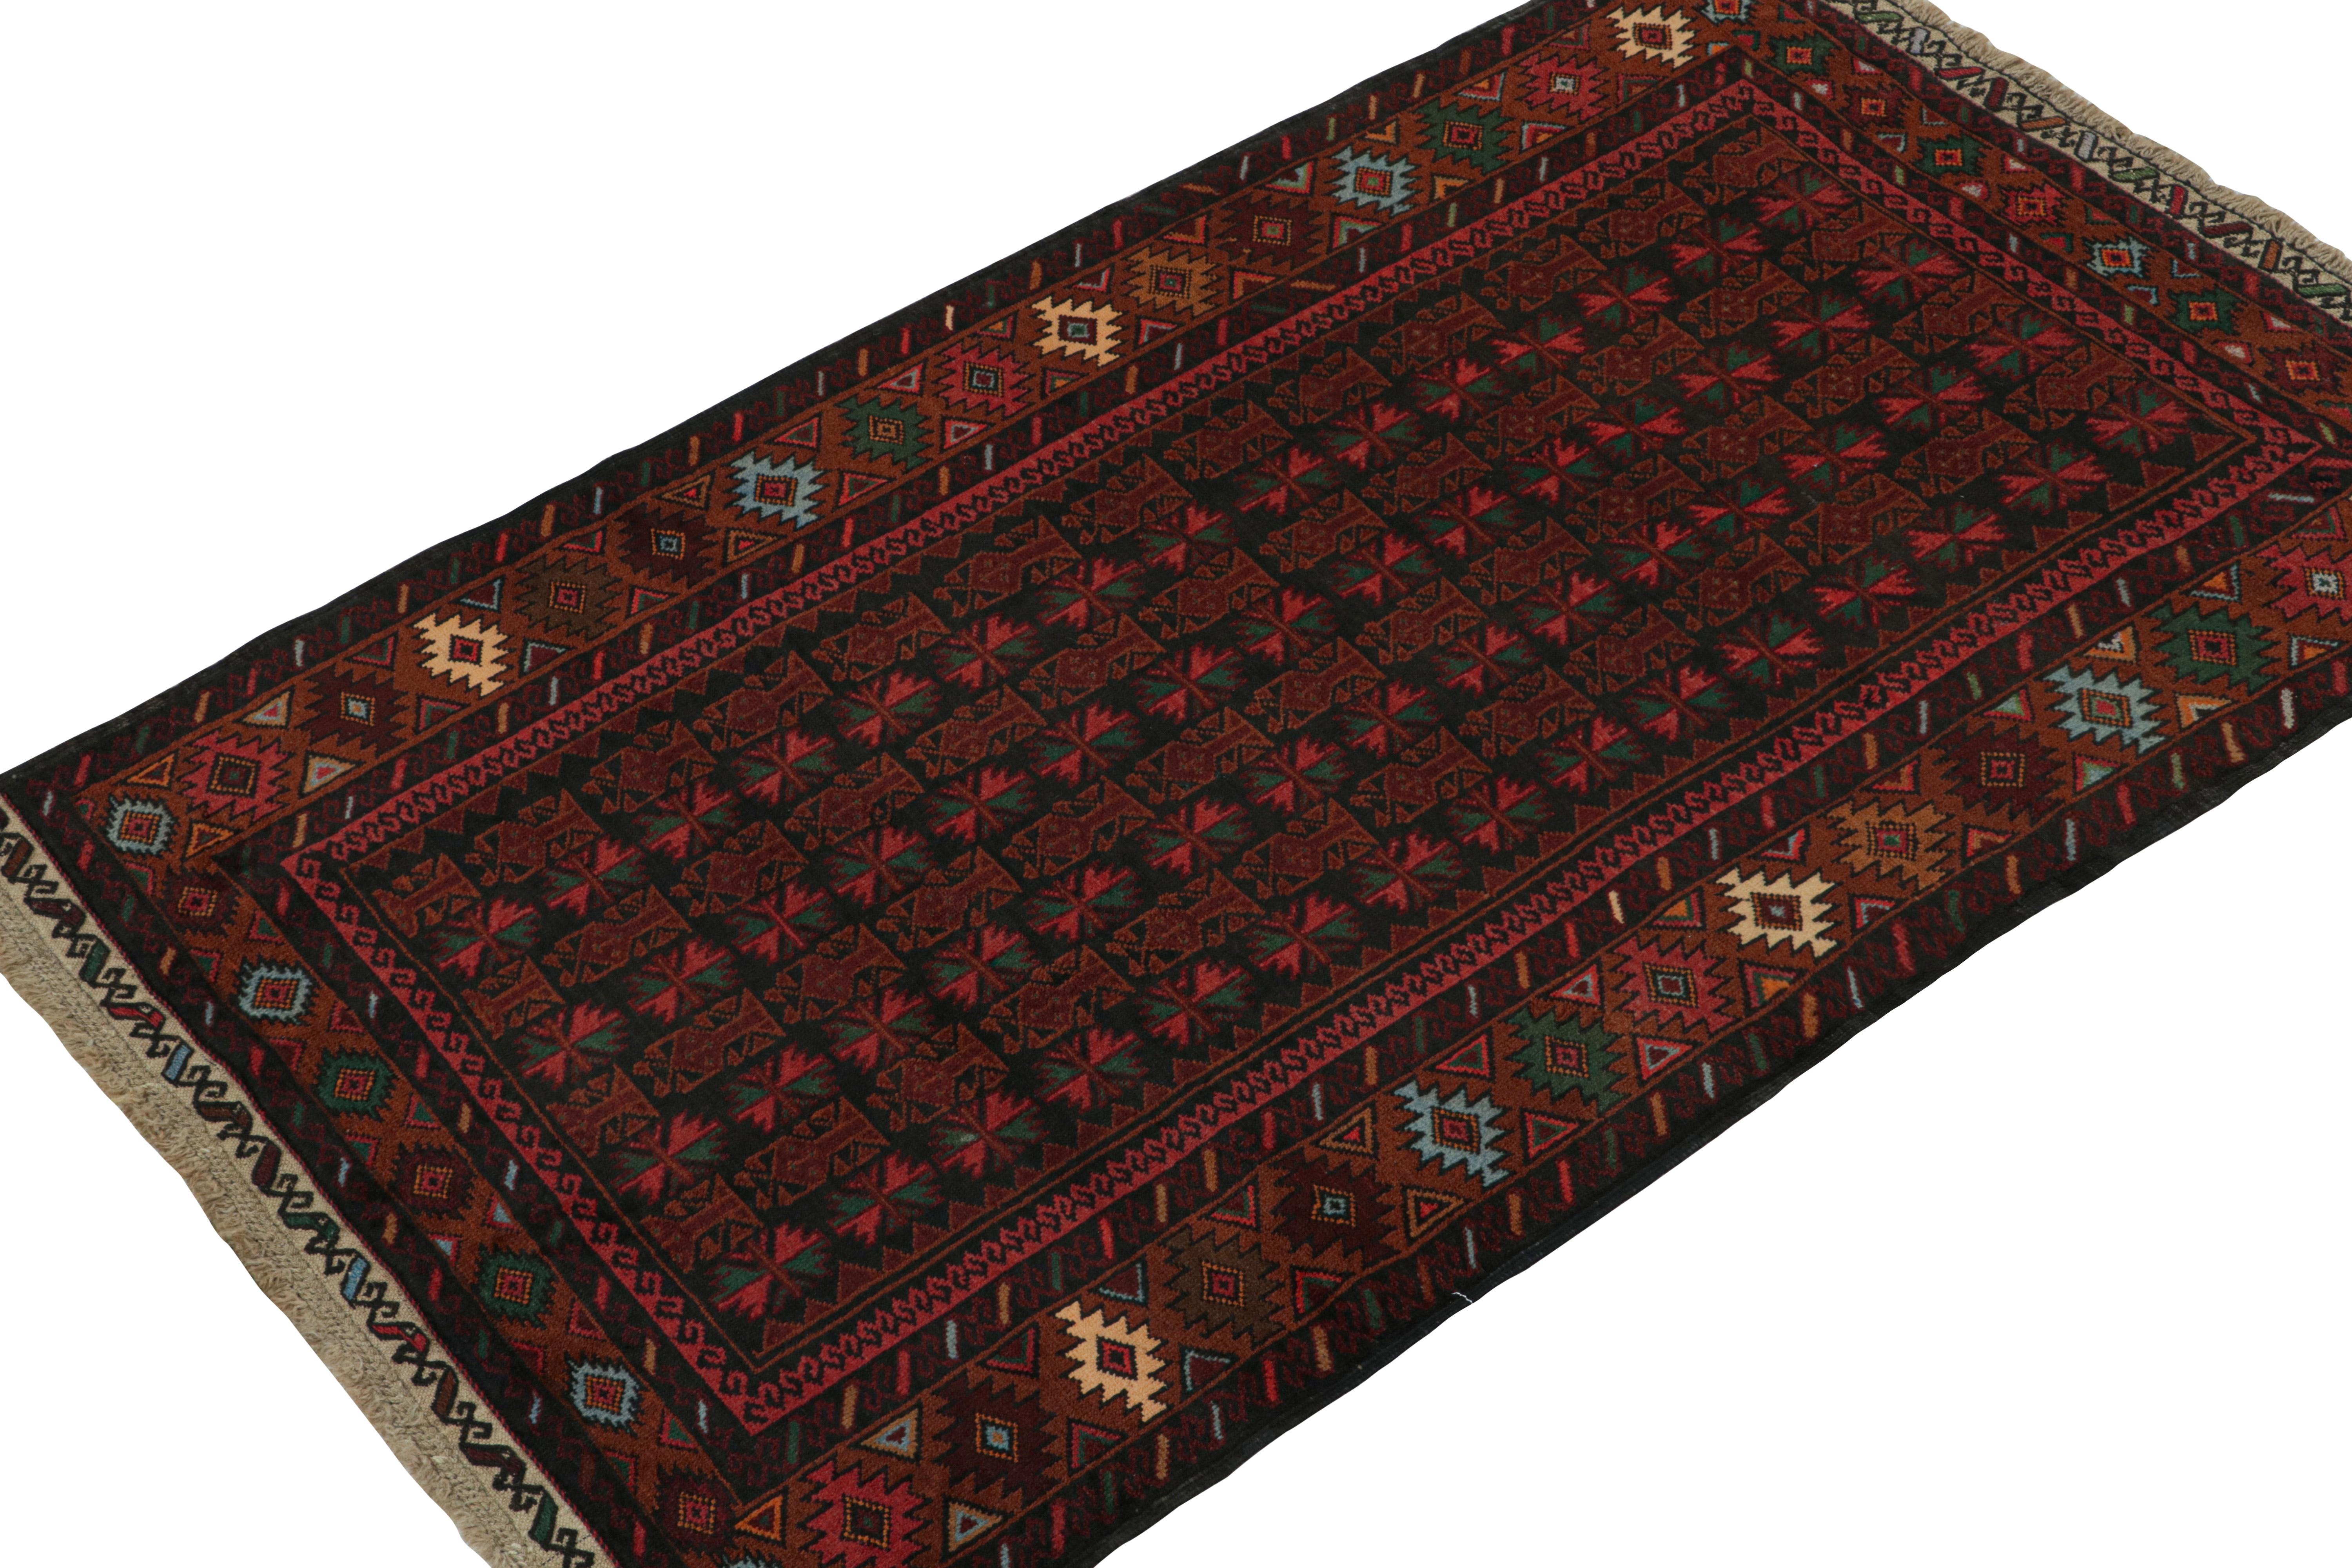 Hand-knotted in wool and goat hair circa 1950-1960, this 4x6 vintage Baluch tribal rug is a rare new curation from Rug & Kilim. 

On the Design: 

This piece enjoys a rich  brown undertone with notable red and teal tones in its geometric patterns.